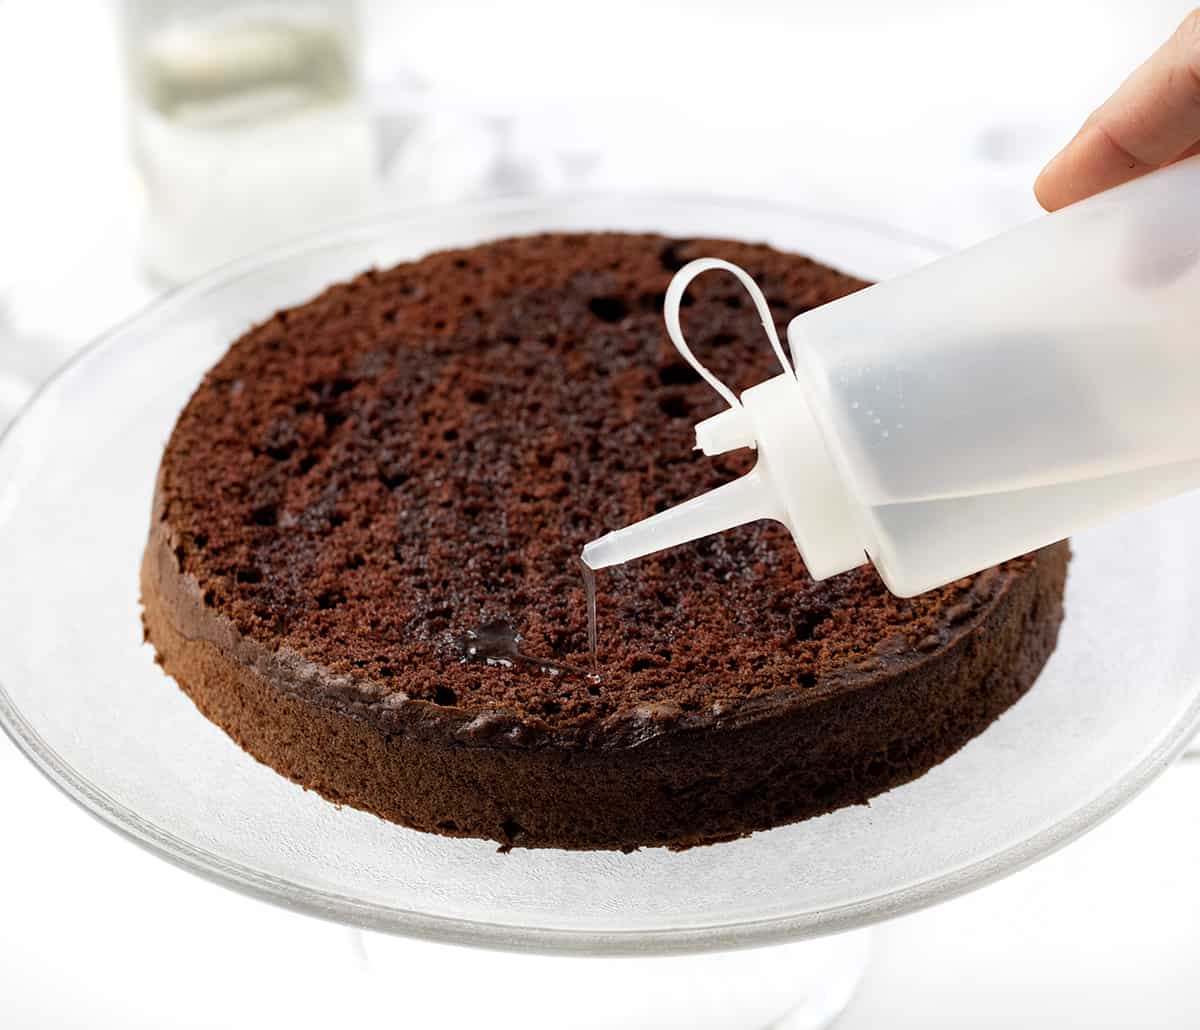 Pouring Simple Syrup Over Cake.